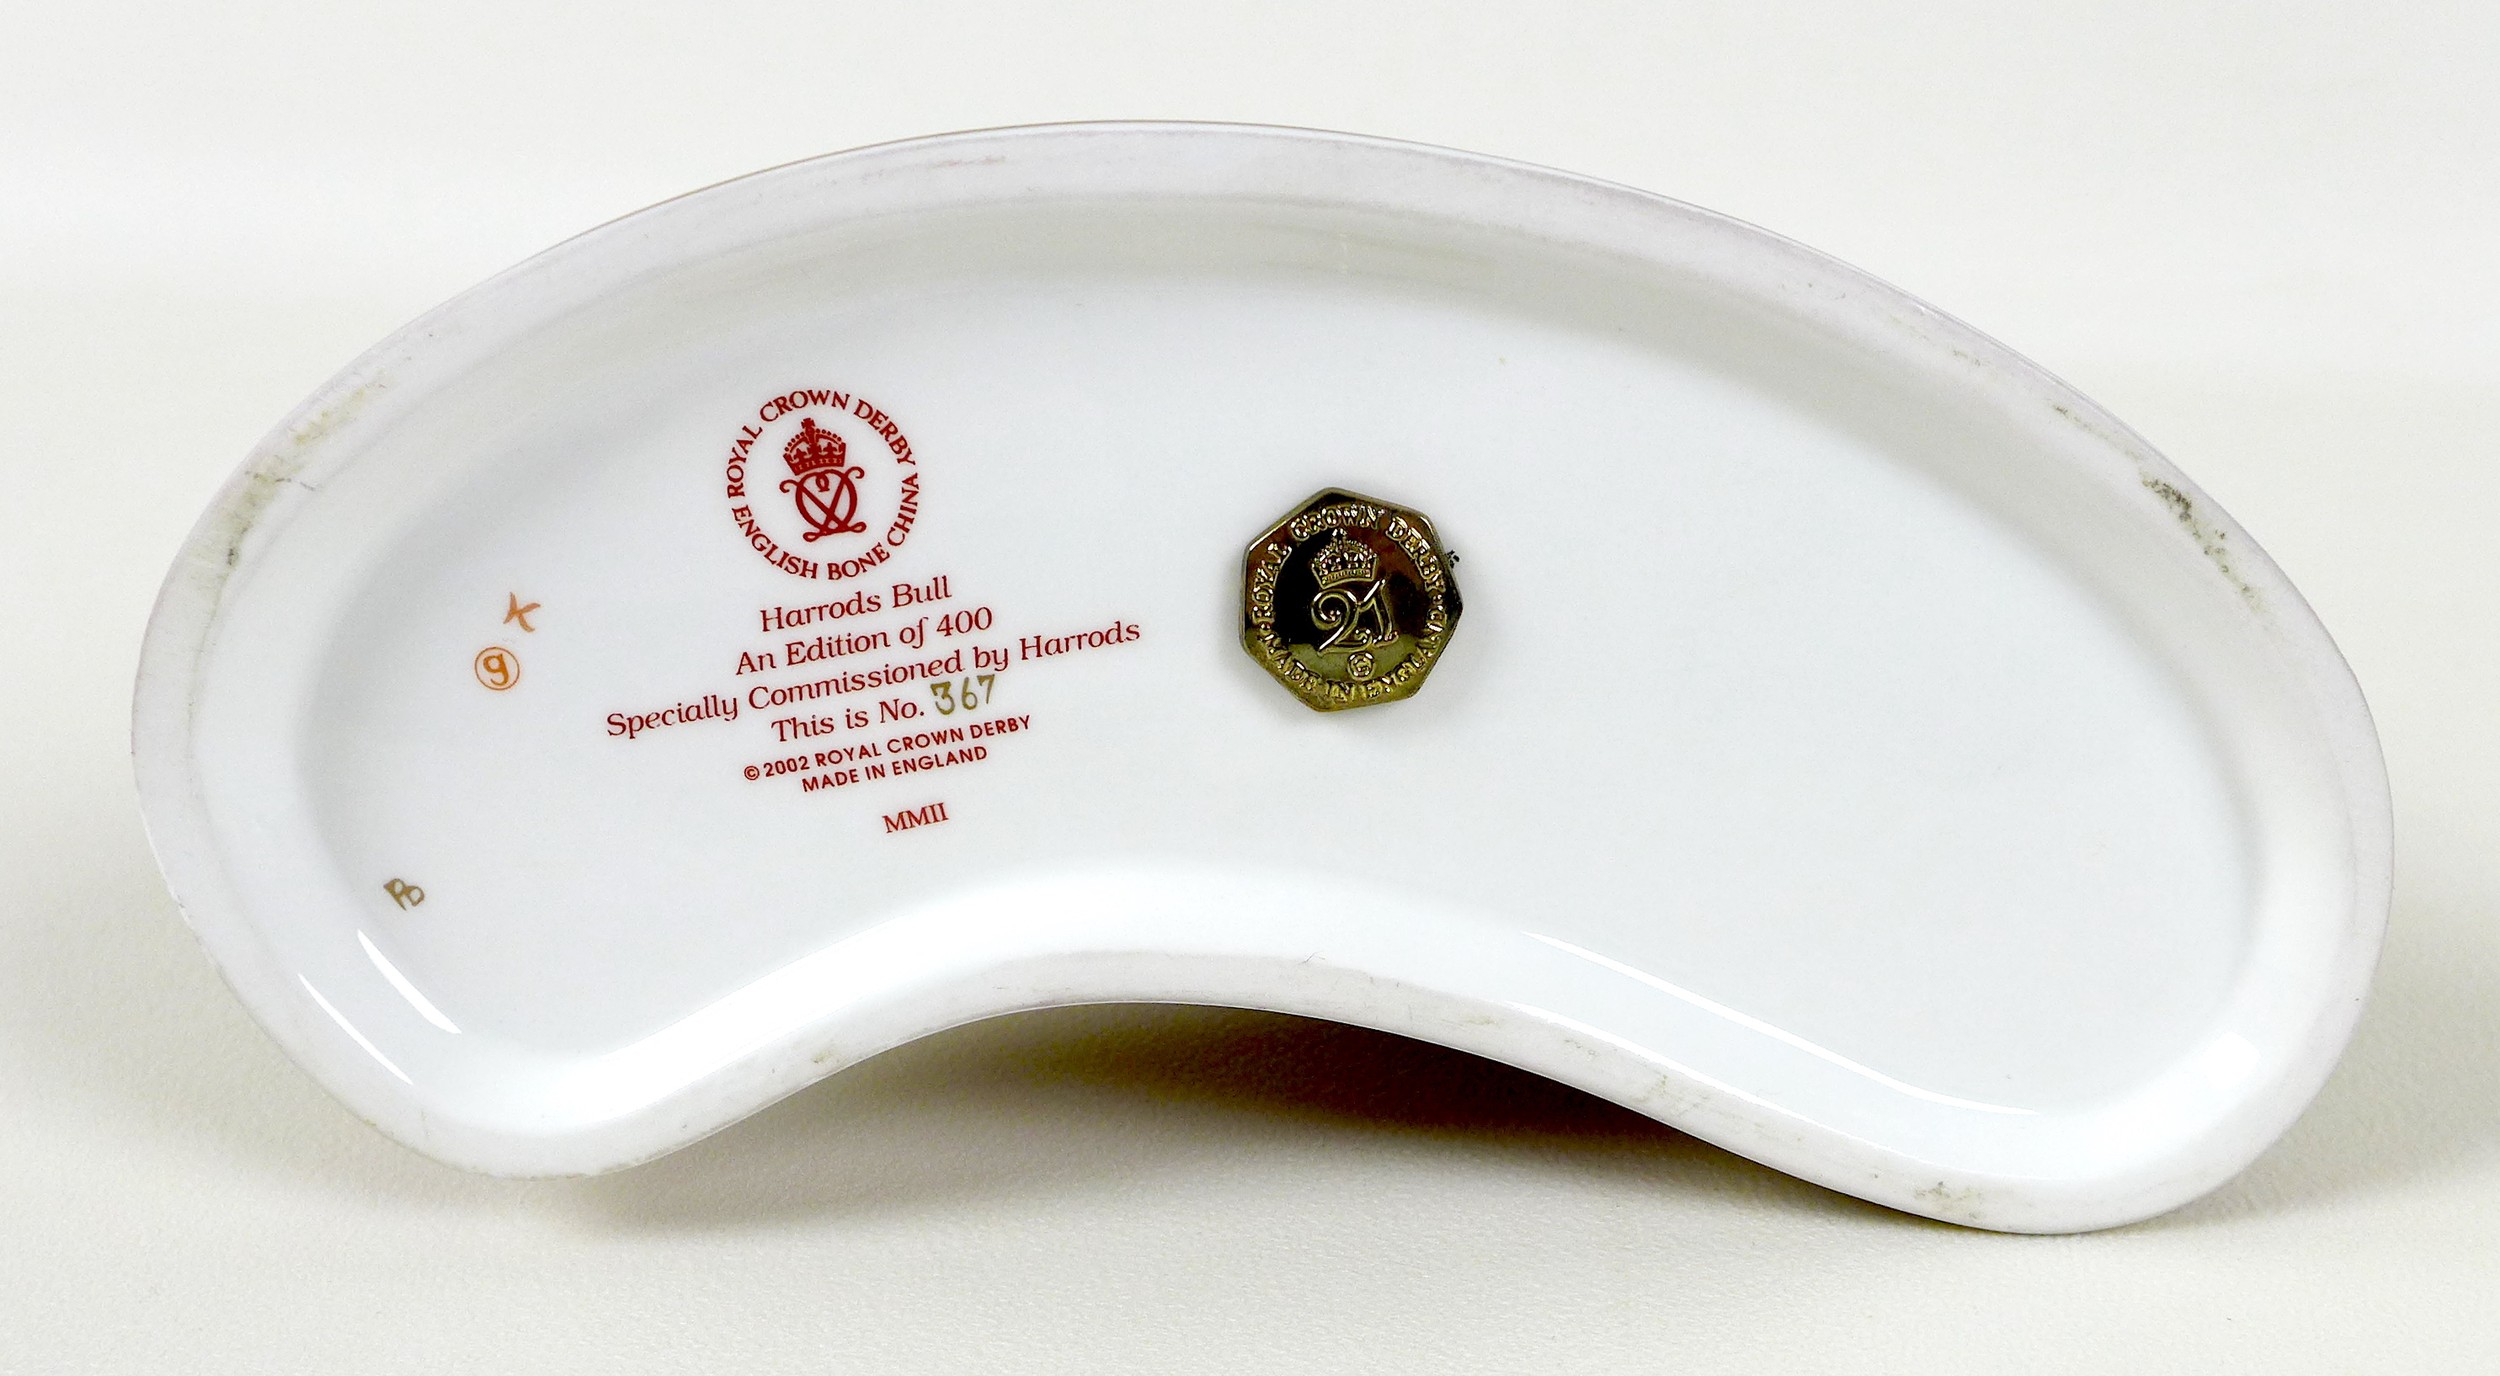 Two Royal Crown Derby paperweights, modelled as 'Harrods Bull', one of a limited edition of 400 - Image 6 of 8